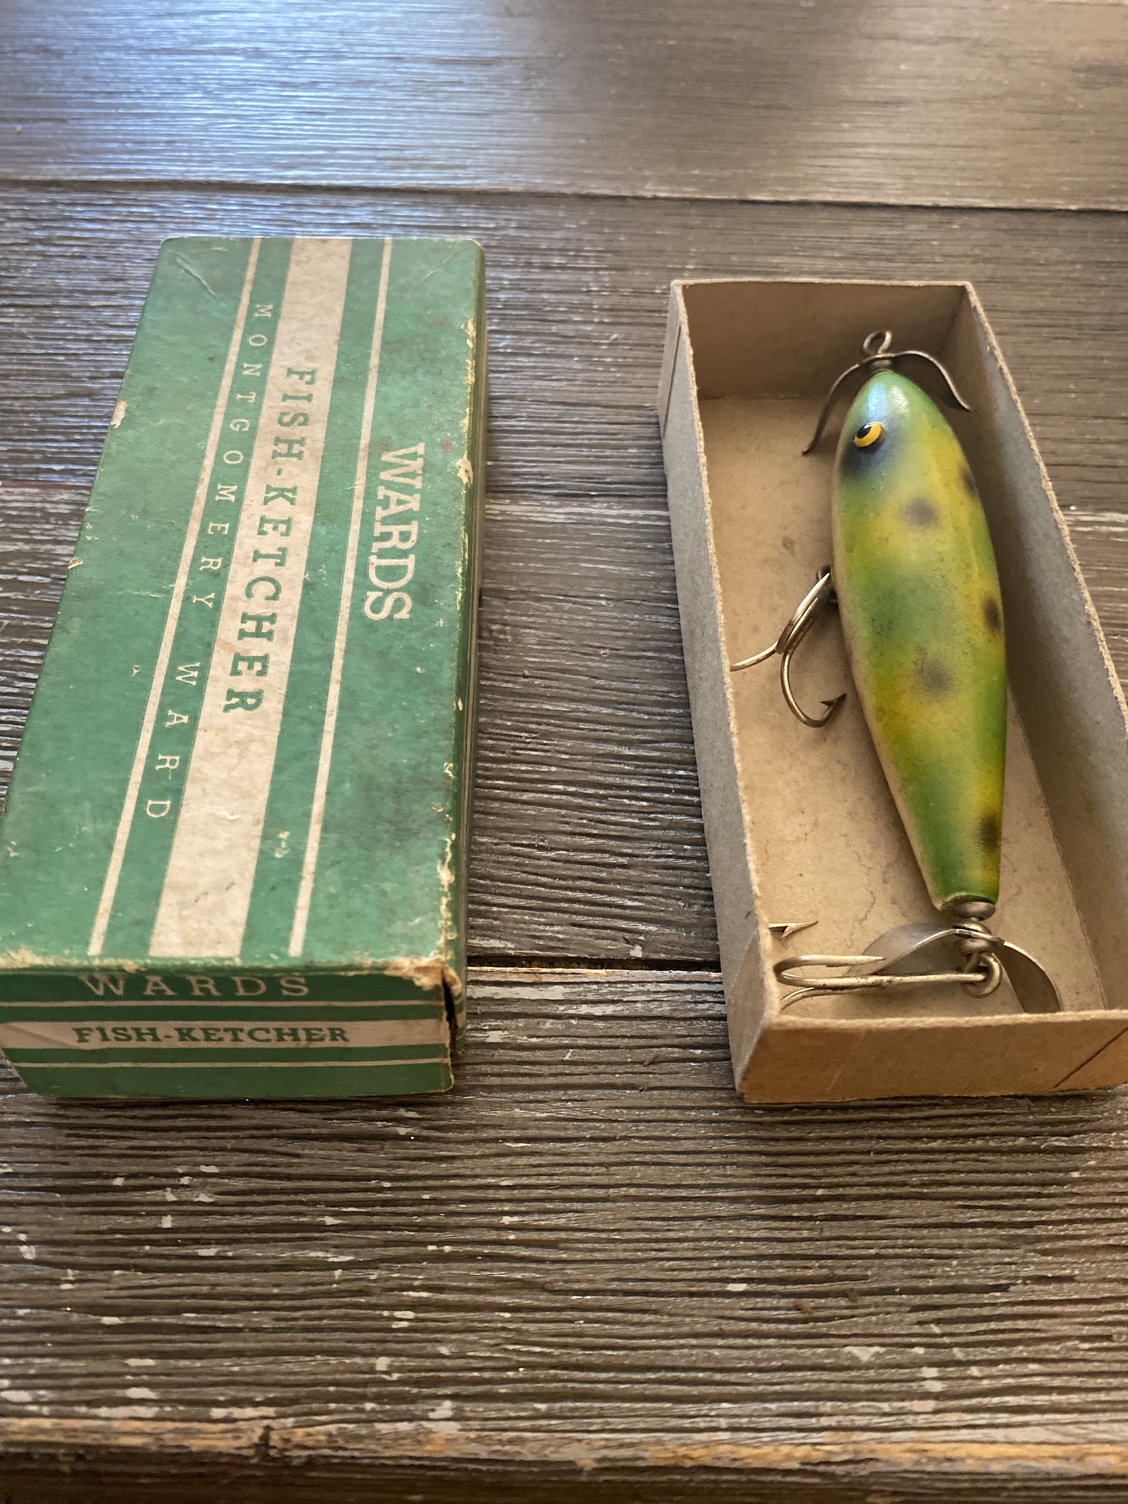 These 10 Vintage Lures Are Still Money  Antique fishing lures, Homemade fishing  lures, Vintage fishing lures